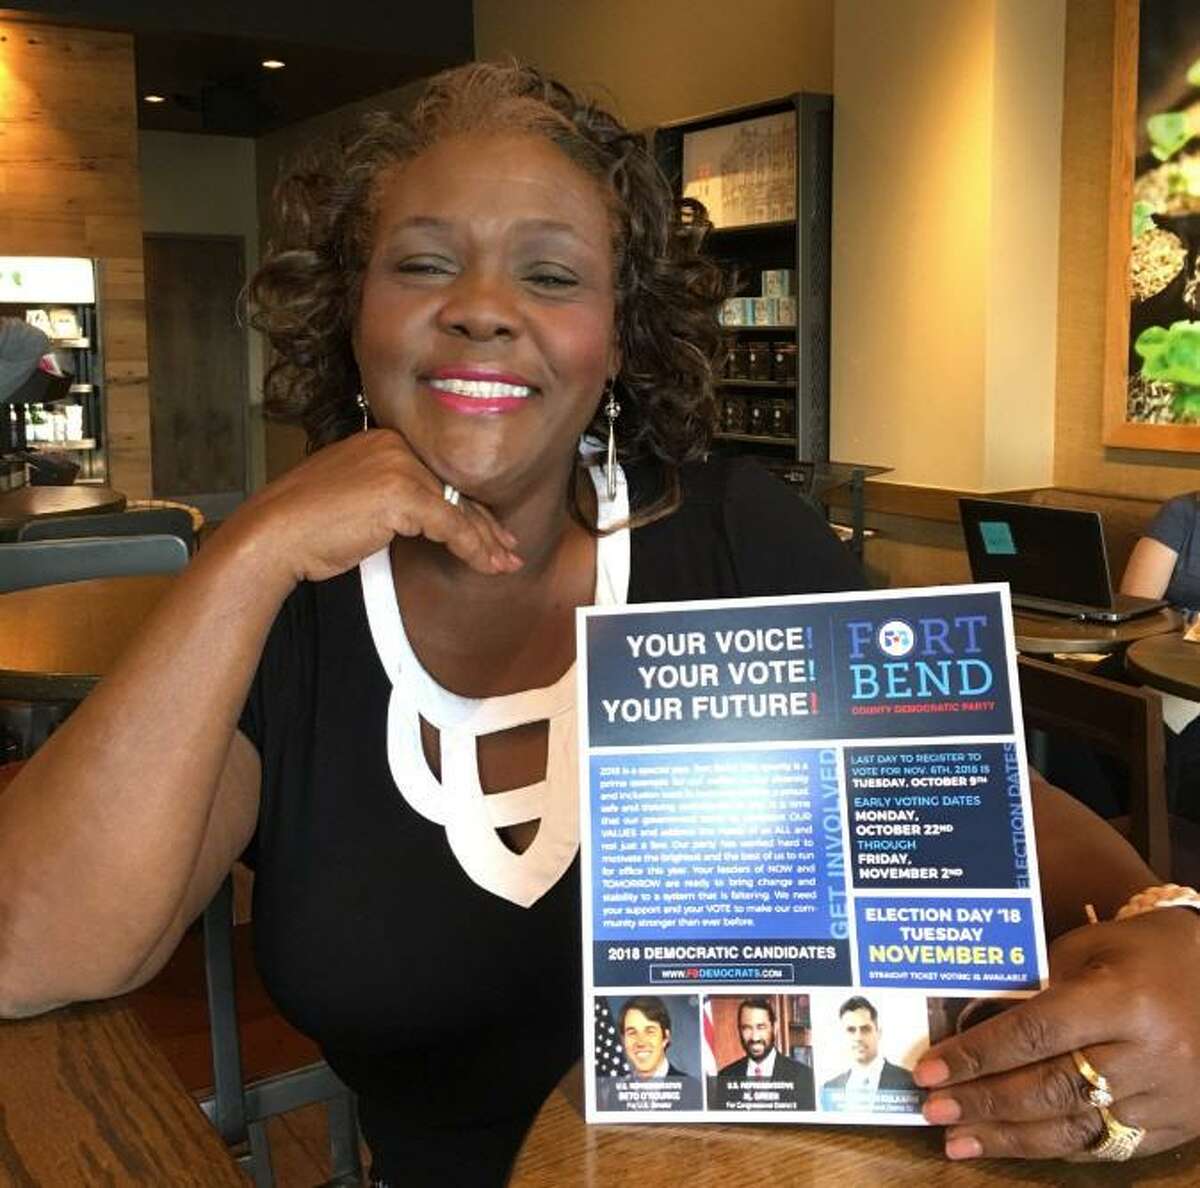 Fort Bend County Democratic Party Chairwoman Cynthia Ginyard said the November ballot offered voters more local Democratic candidates than in recent years and is the result of building a climate and culture for winning.